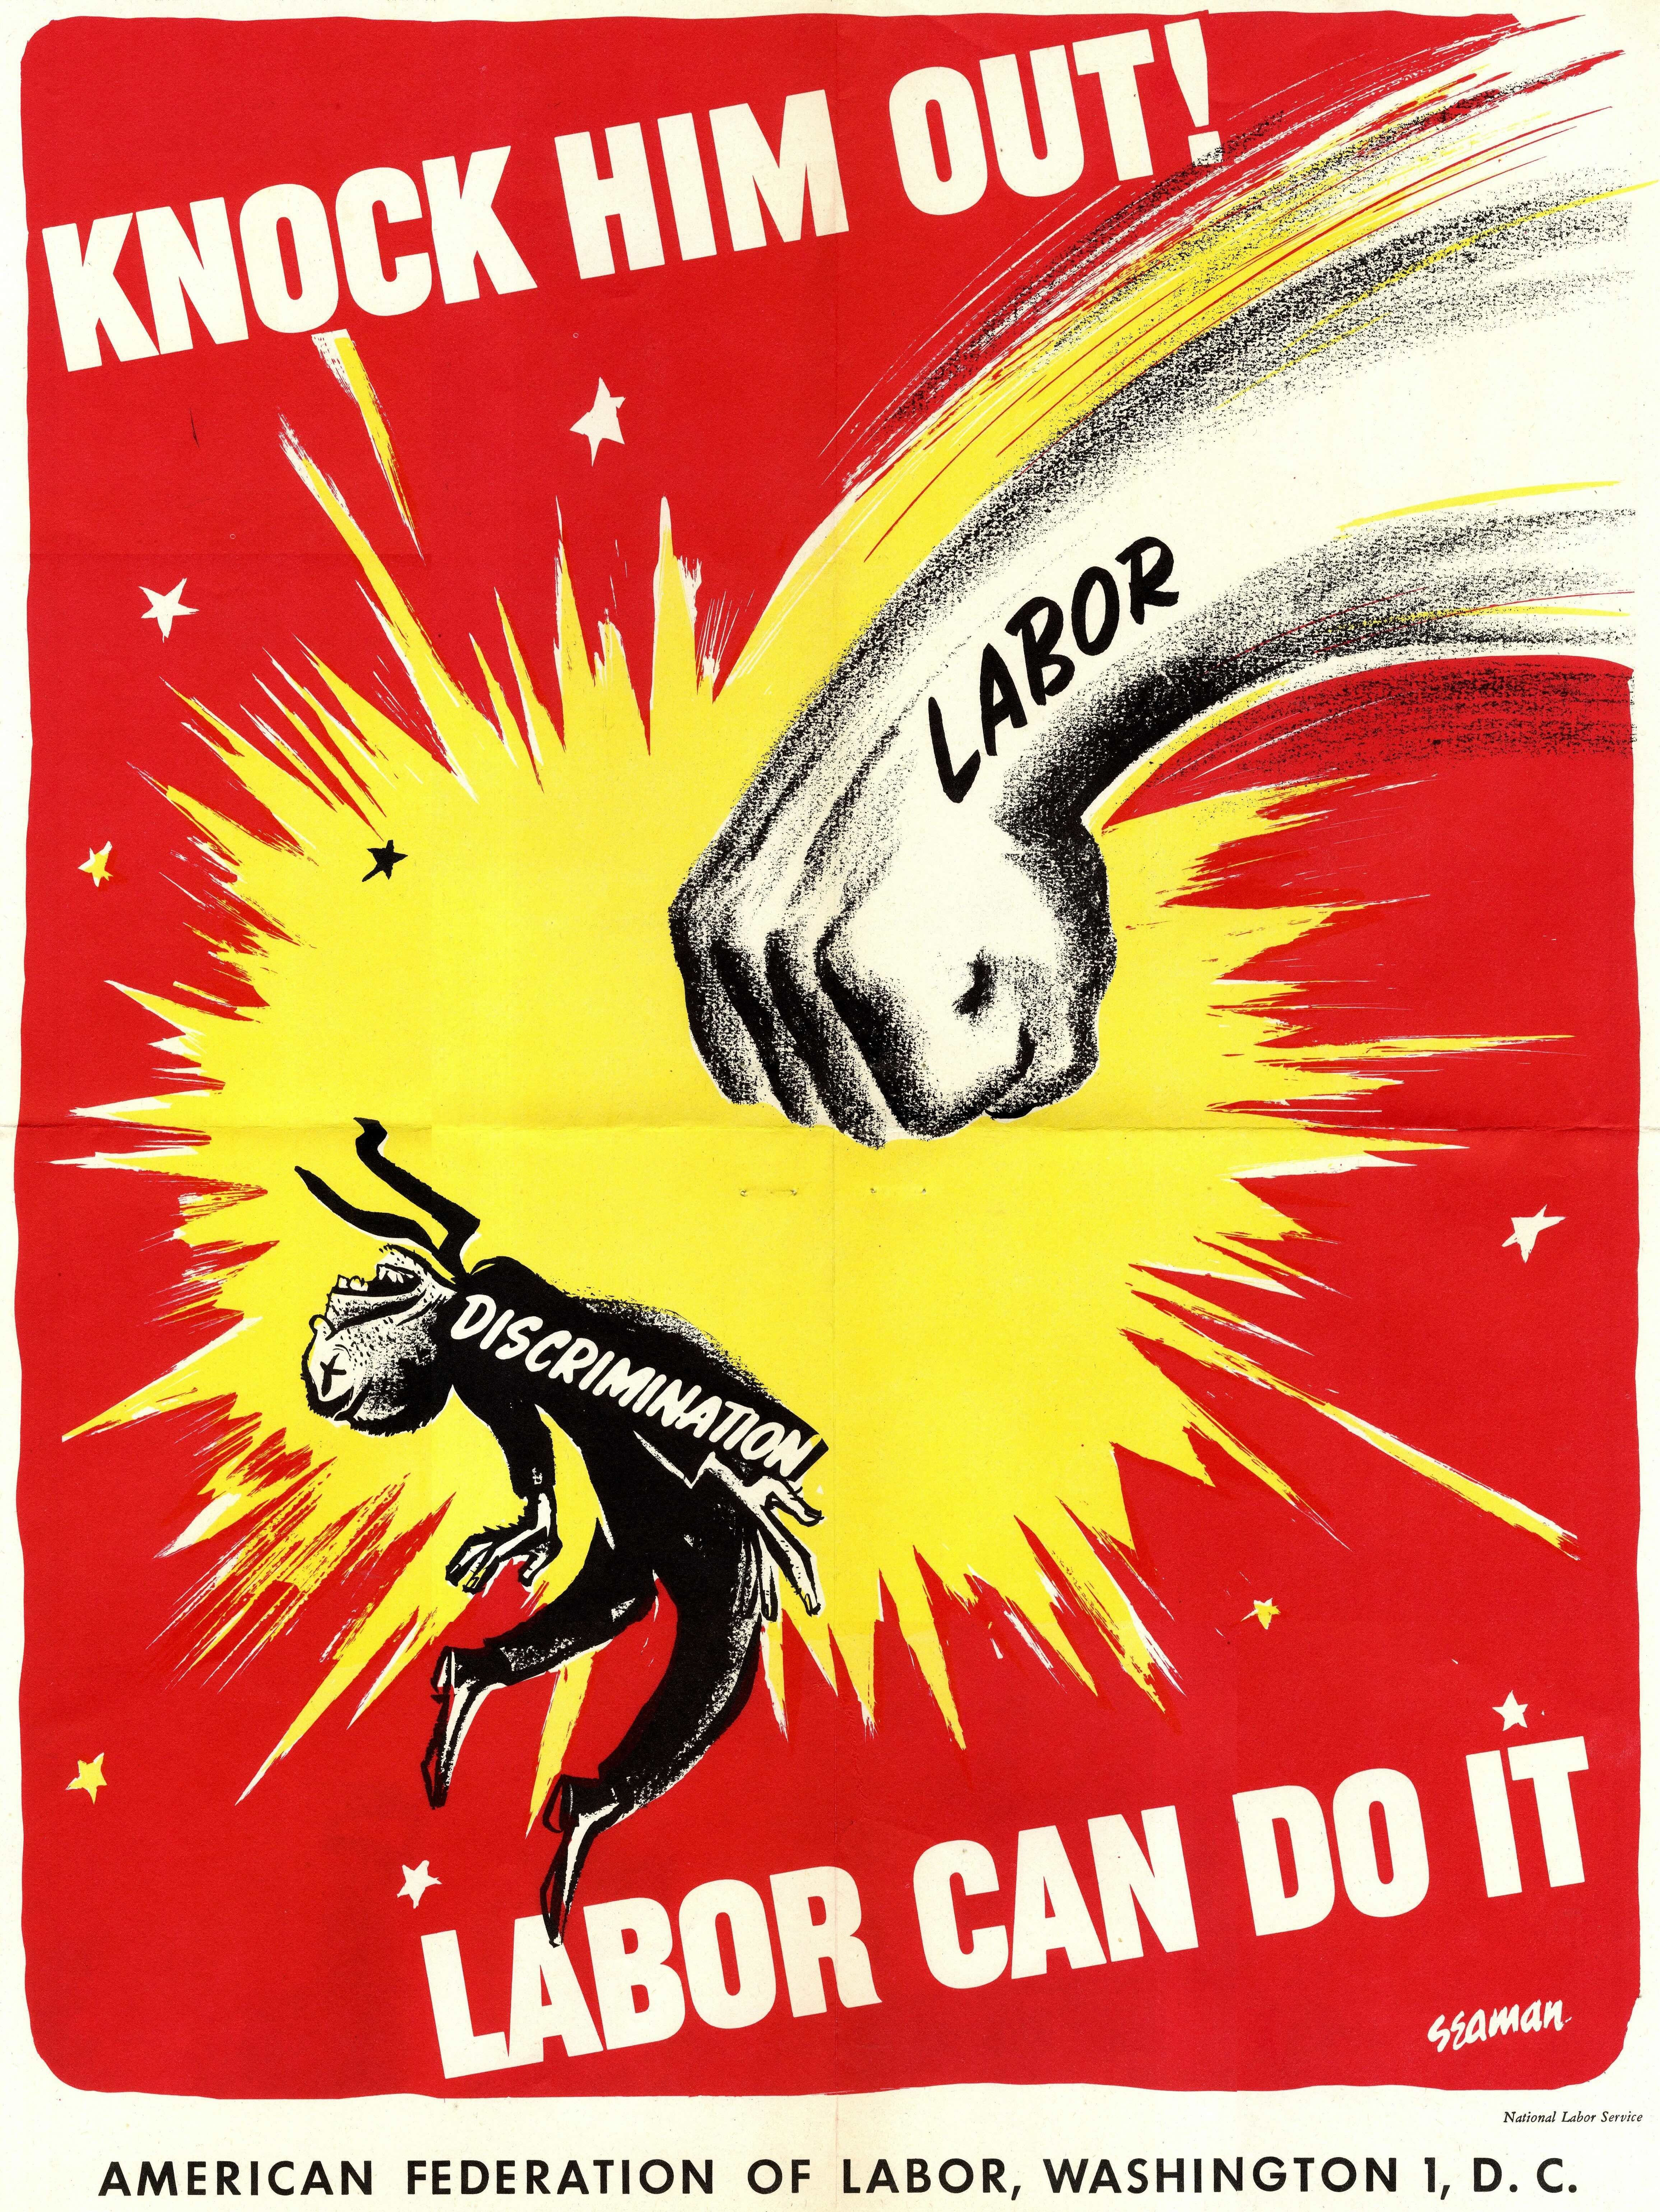 Red background with yellow explosion in the middle. A fist saying "LABOR" punches a man wearing a black and white suit saying "DISCRIMINATION." Text at the bottom reads "LABOR CAN DO IT."